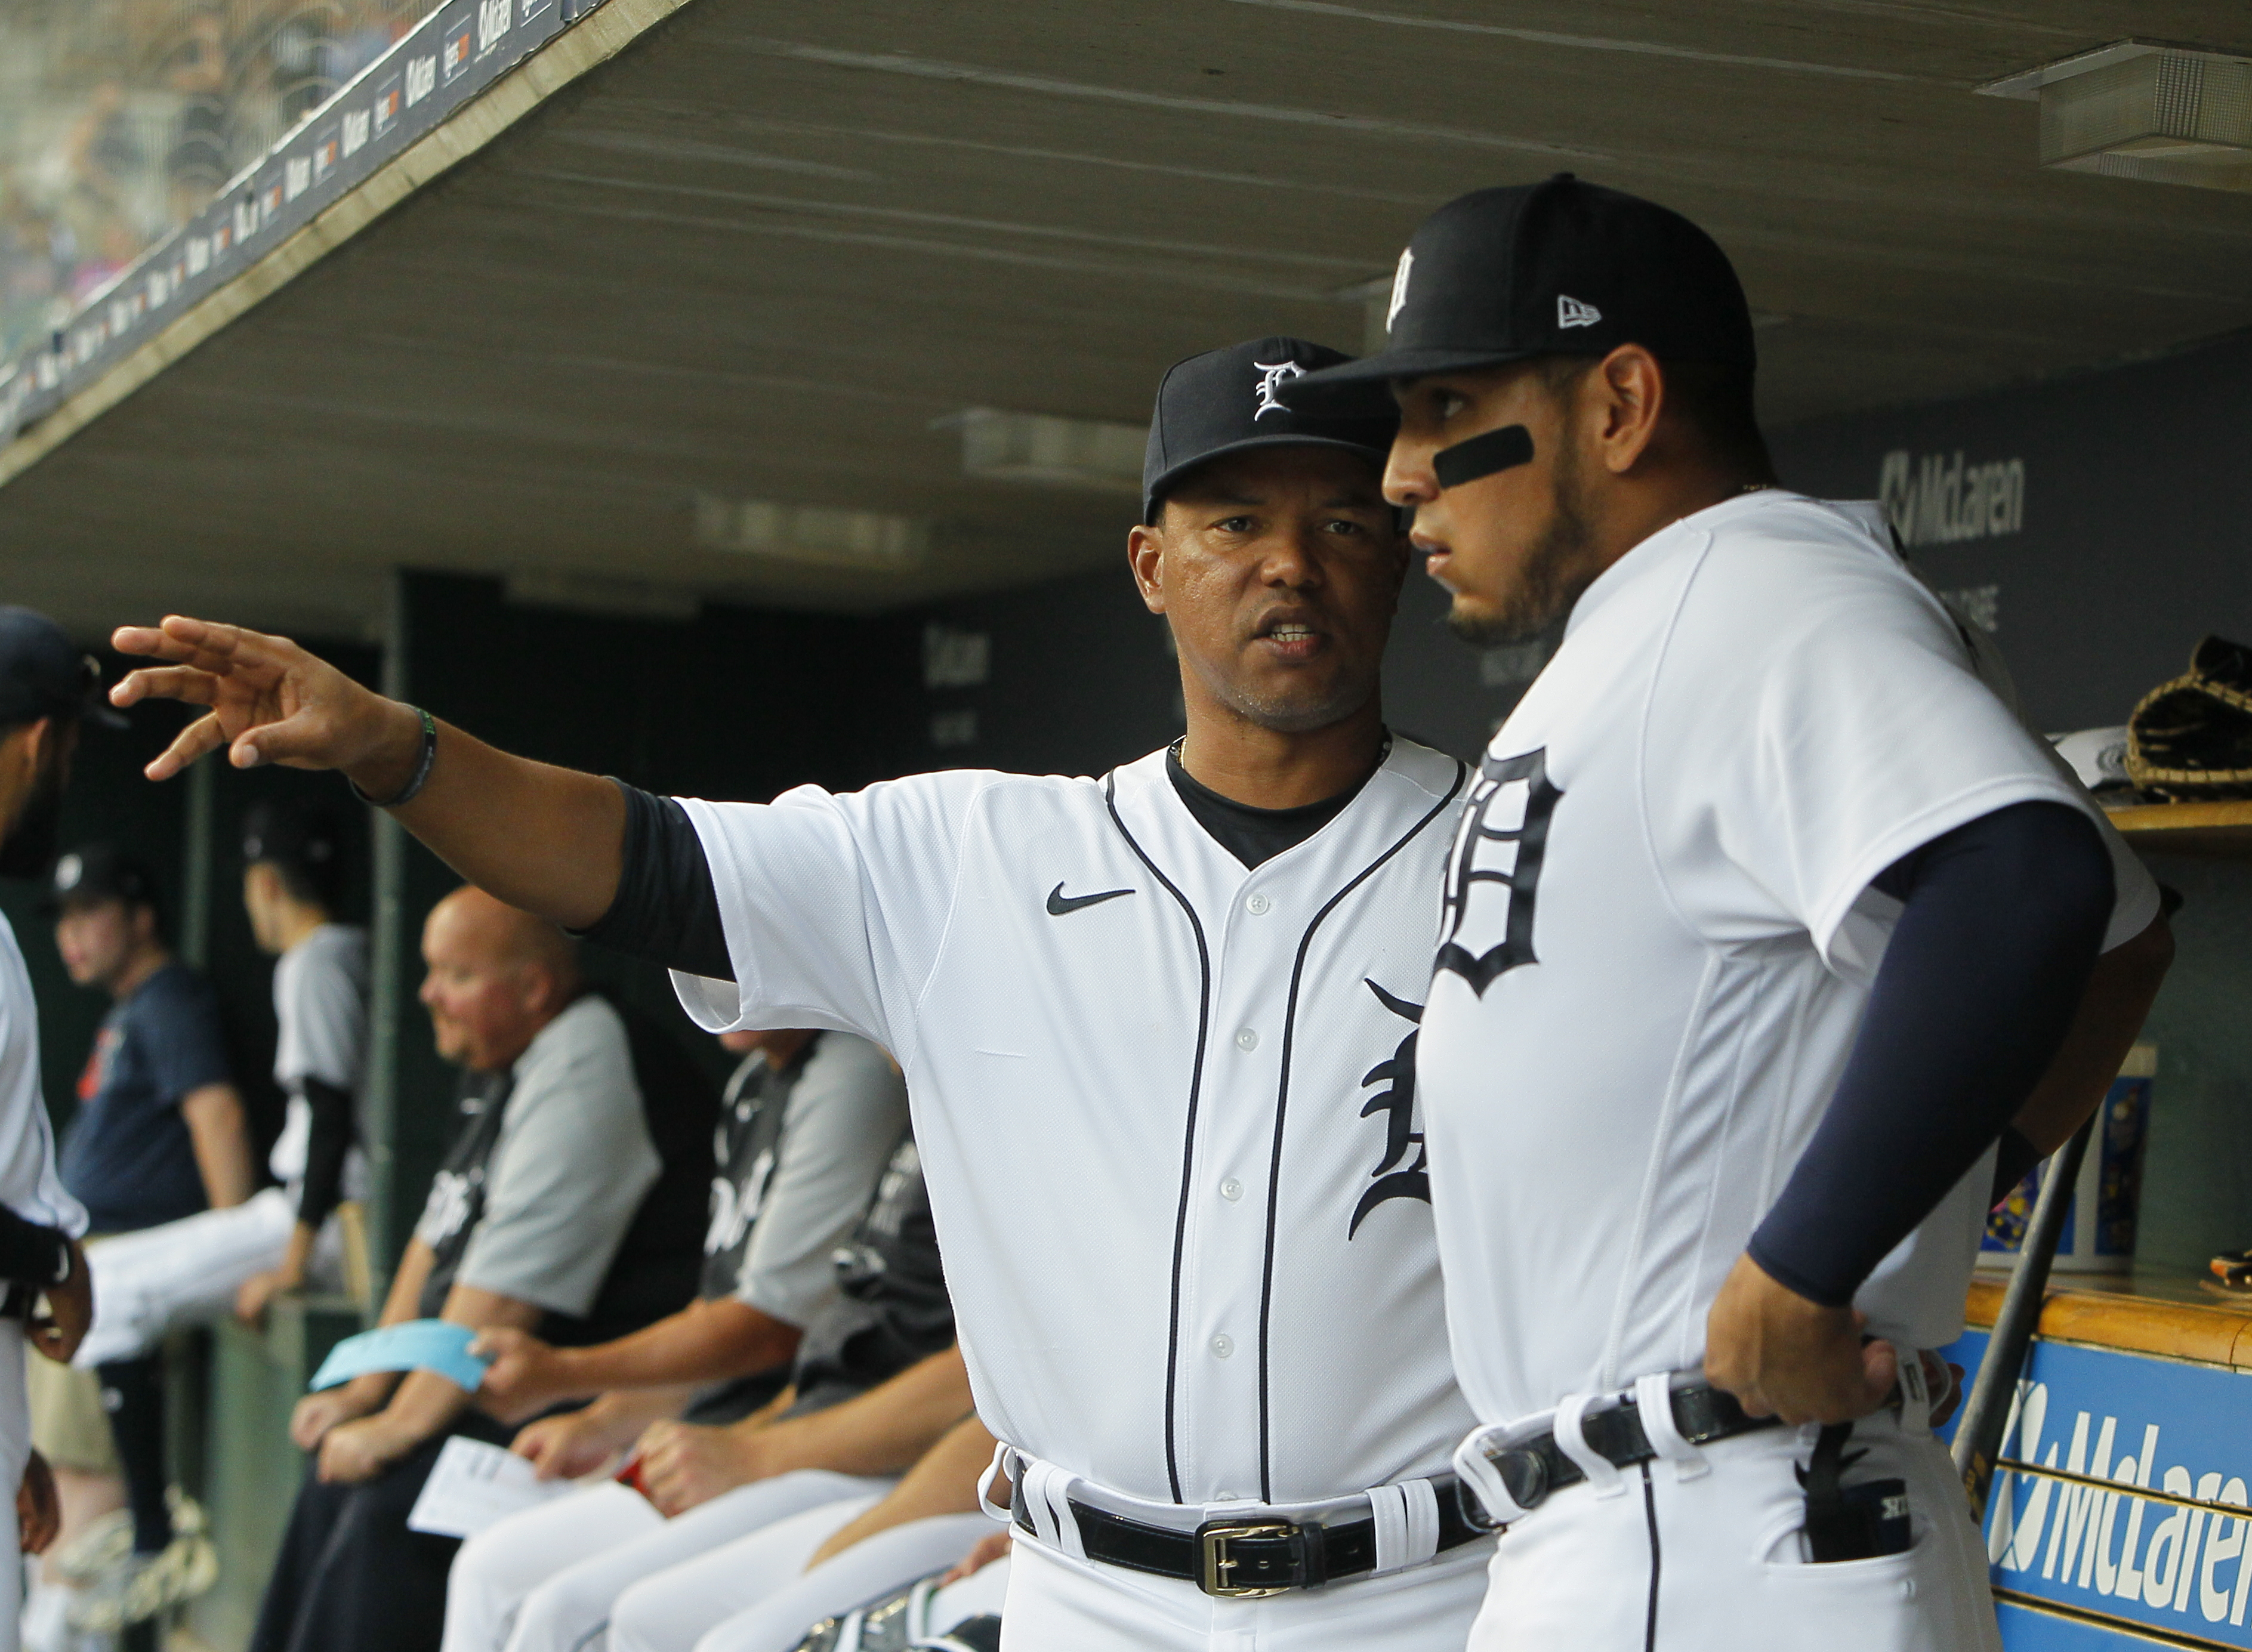 Detroit Tigers hire Toledo's Mike Hessman as assistant hitting coach